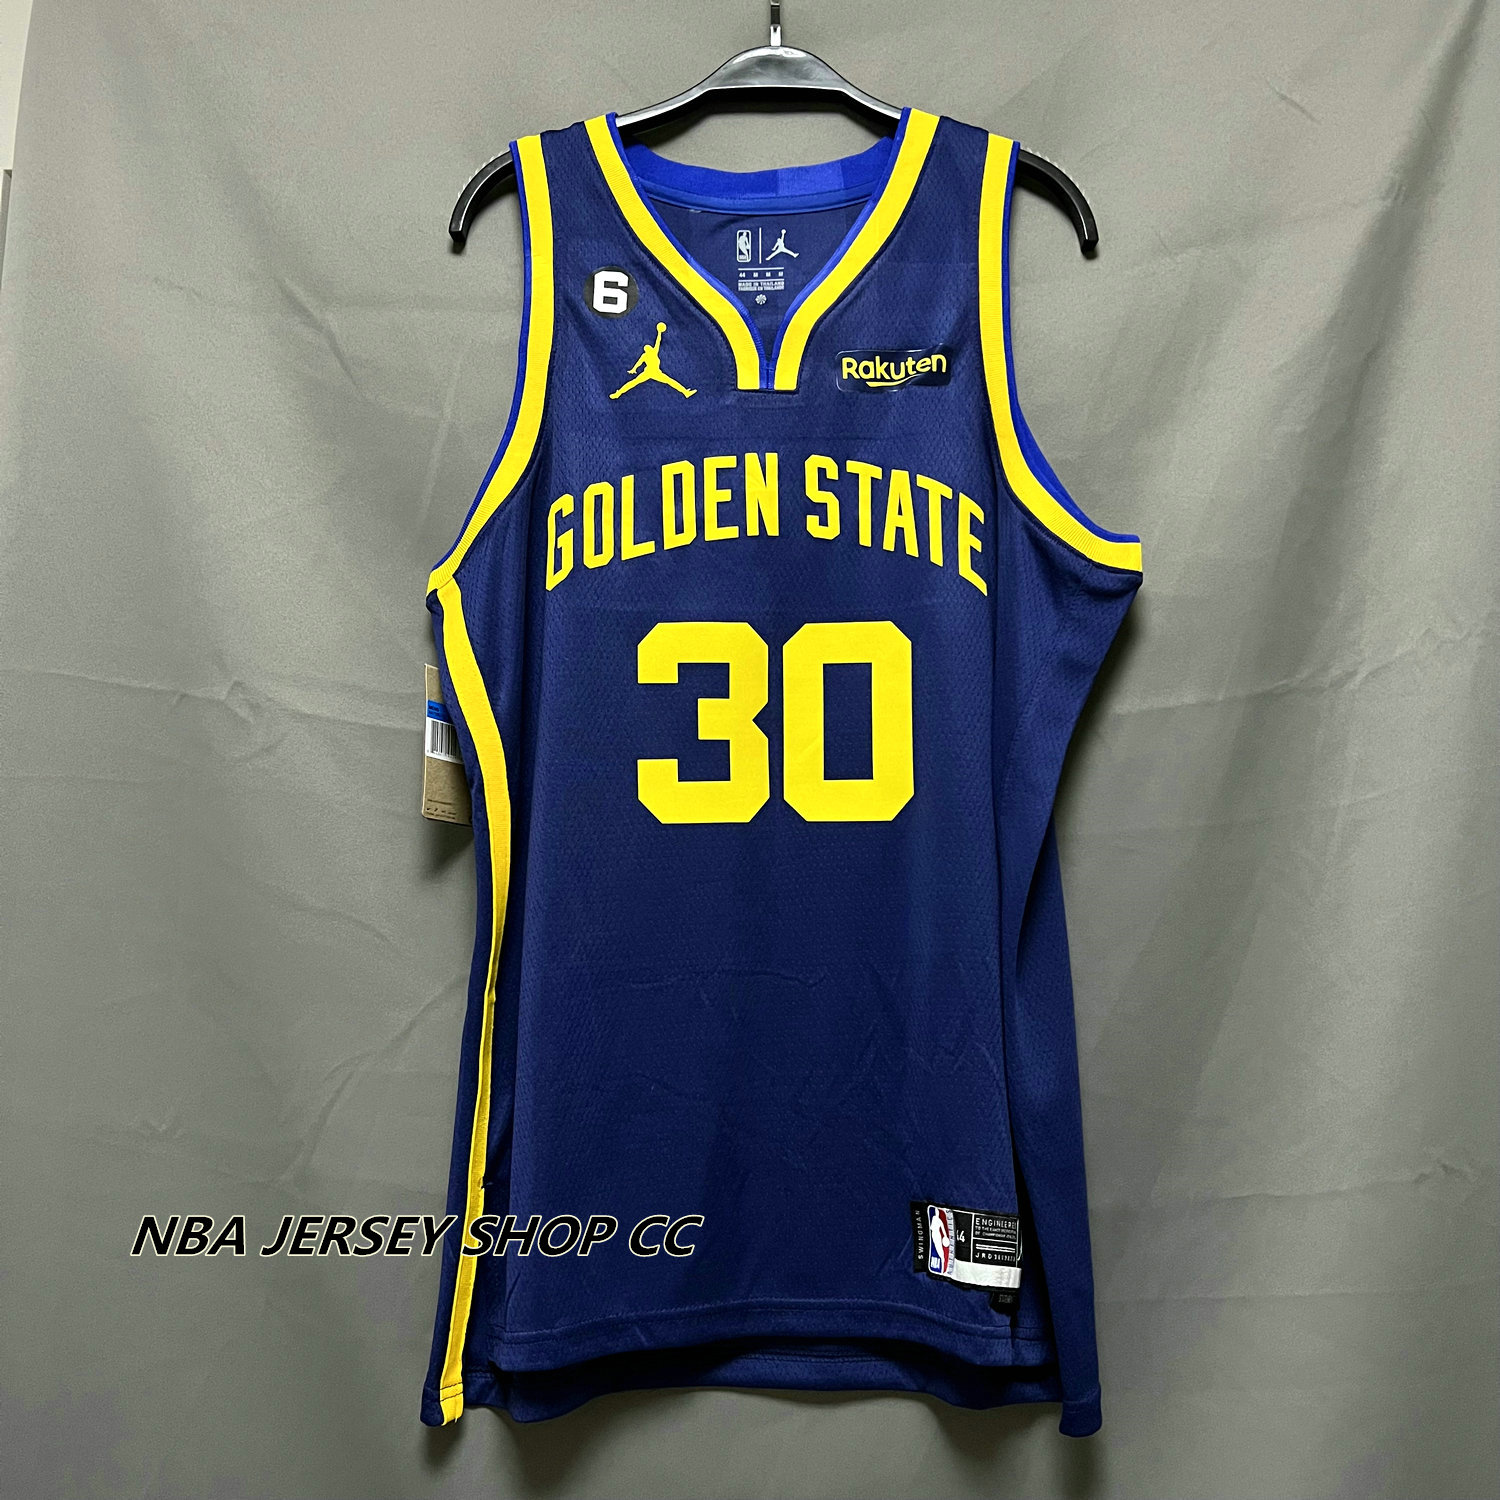 □✢【hot pressed】Curry Golden State Warriors 30# STEPHEN CURRY NBA jersey  2021 all star yellow basketb